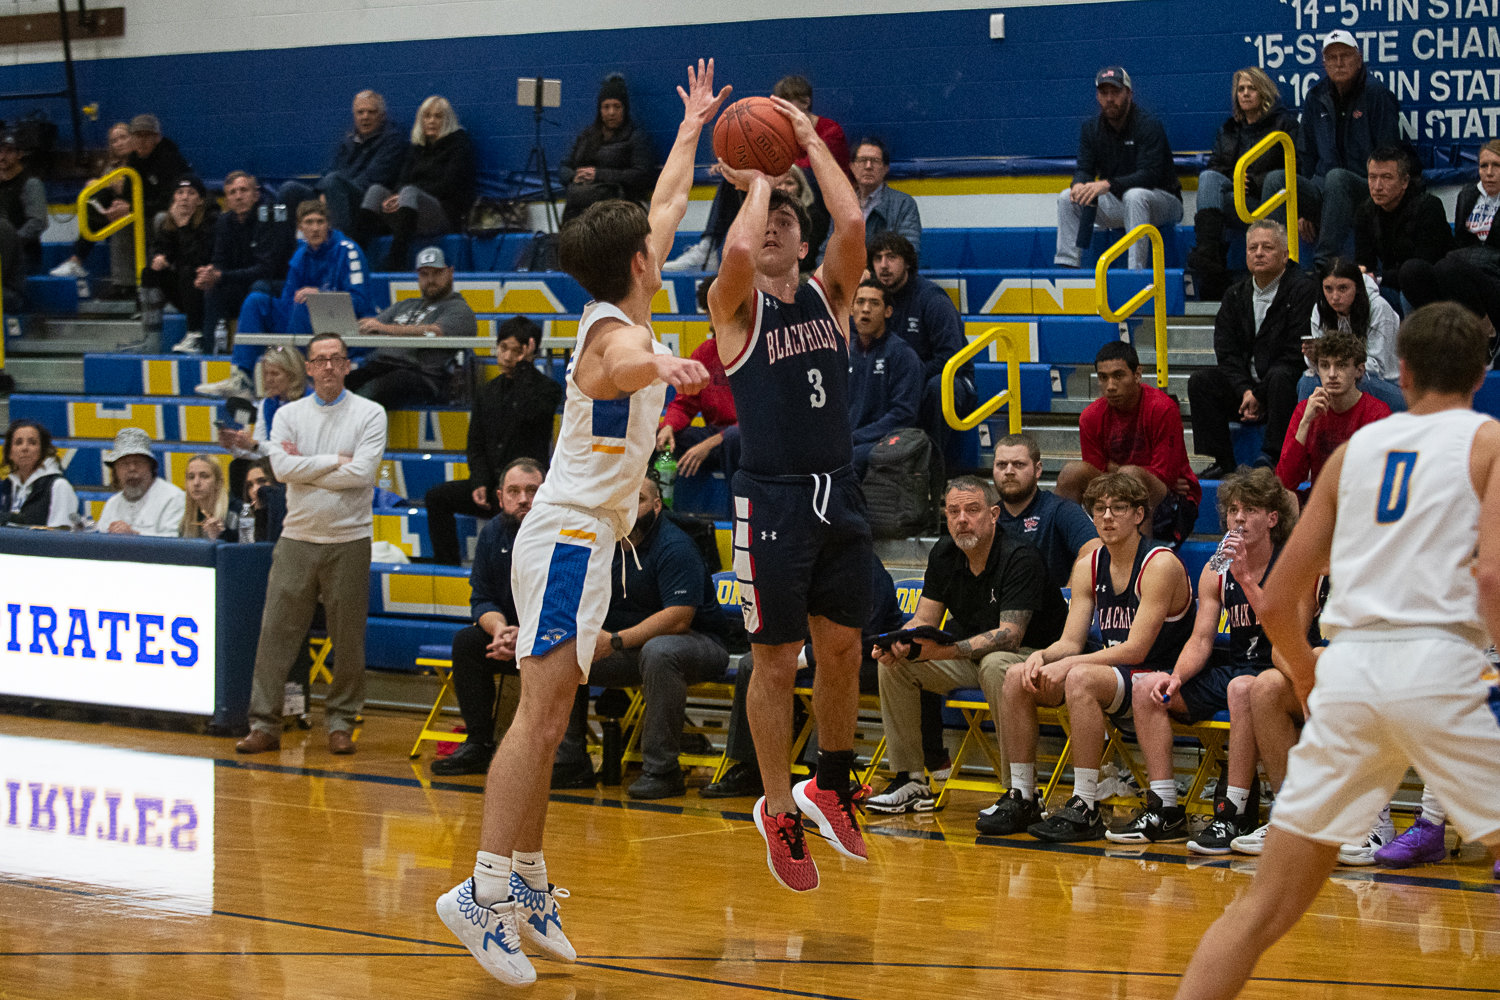 Johnnie Stallings shoots the ball during Black Hills' 67-60 loss to Adna on Nov. 29.